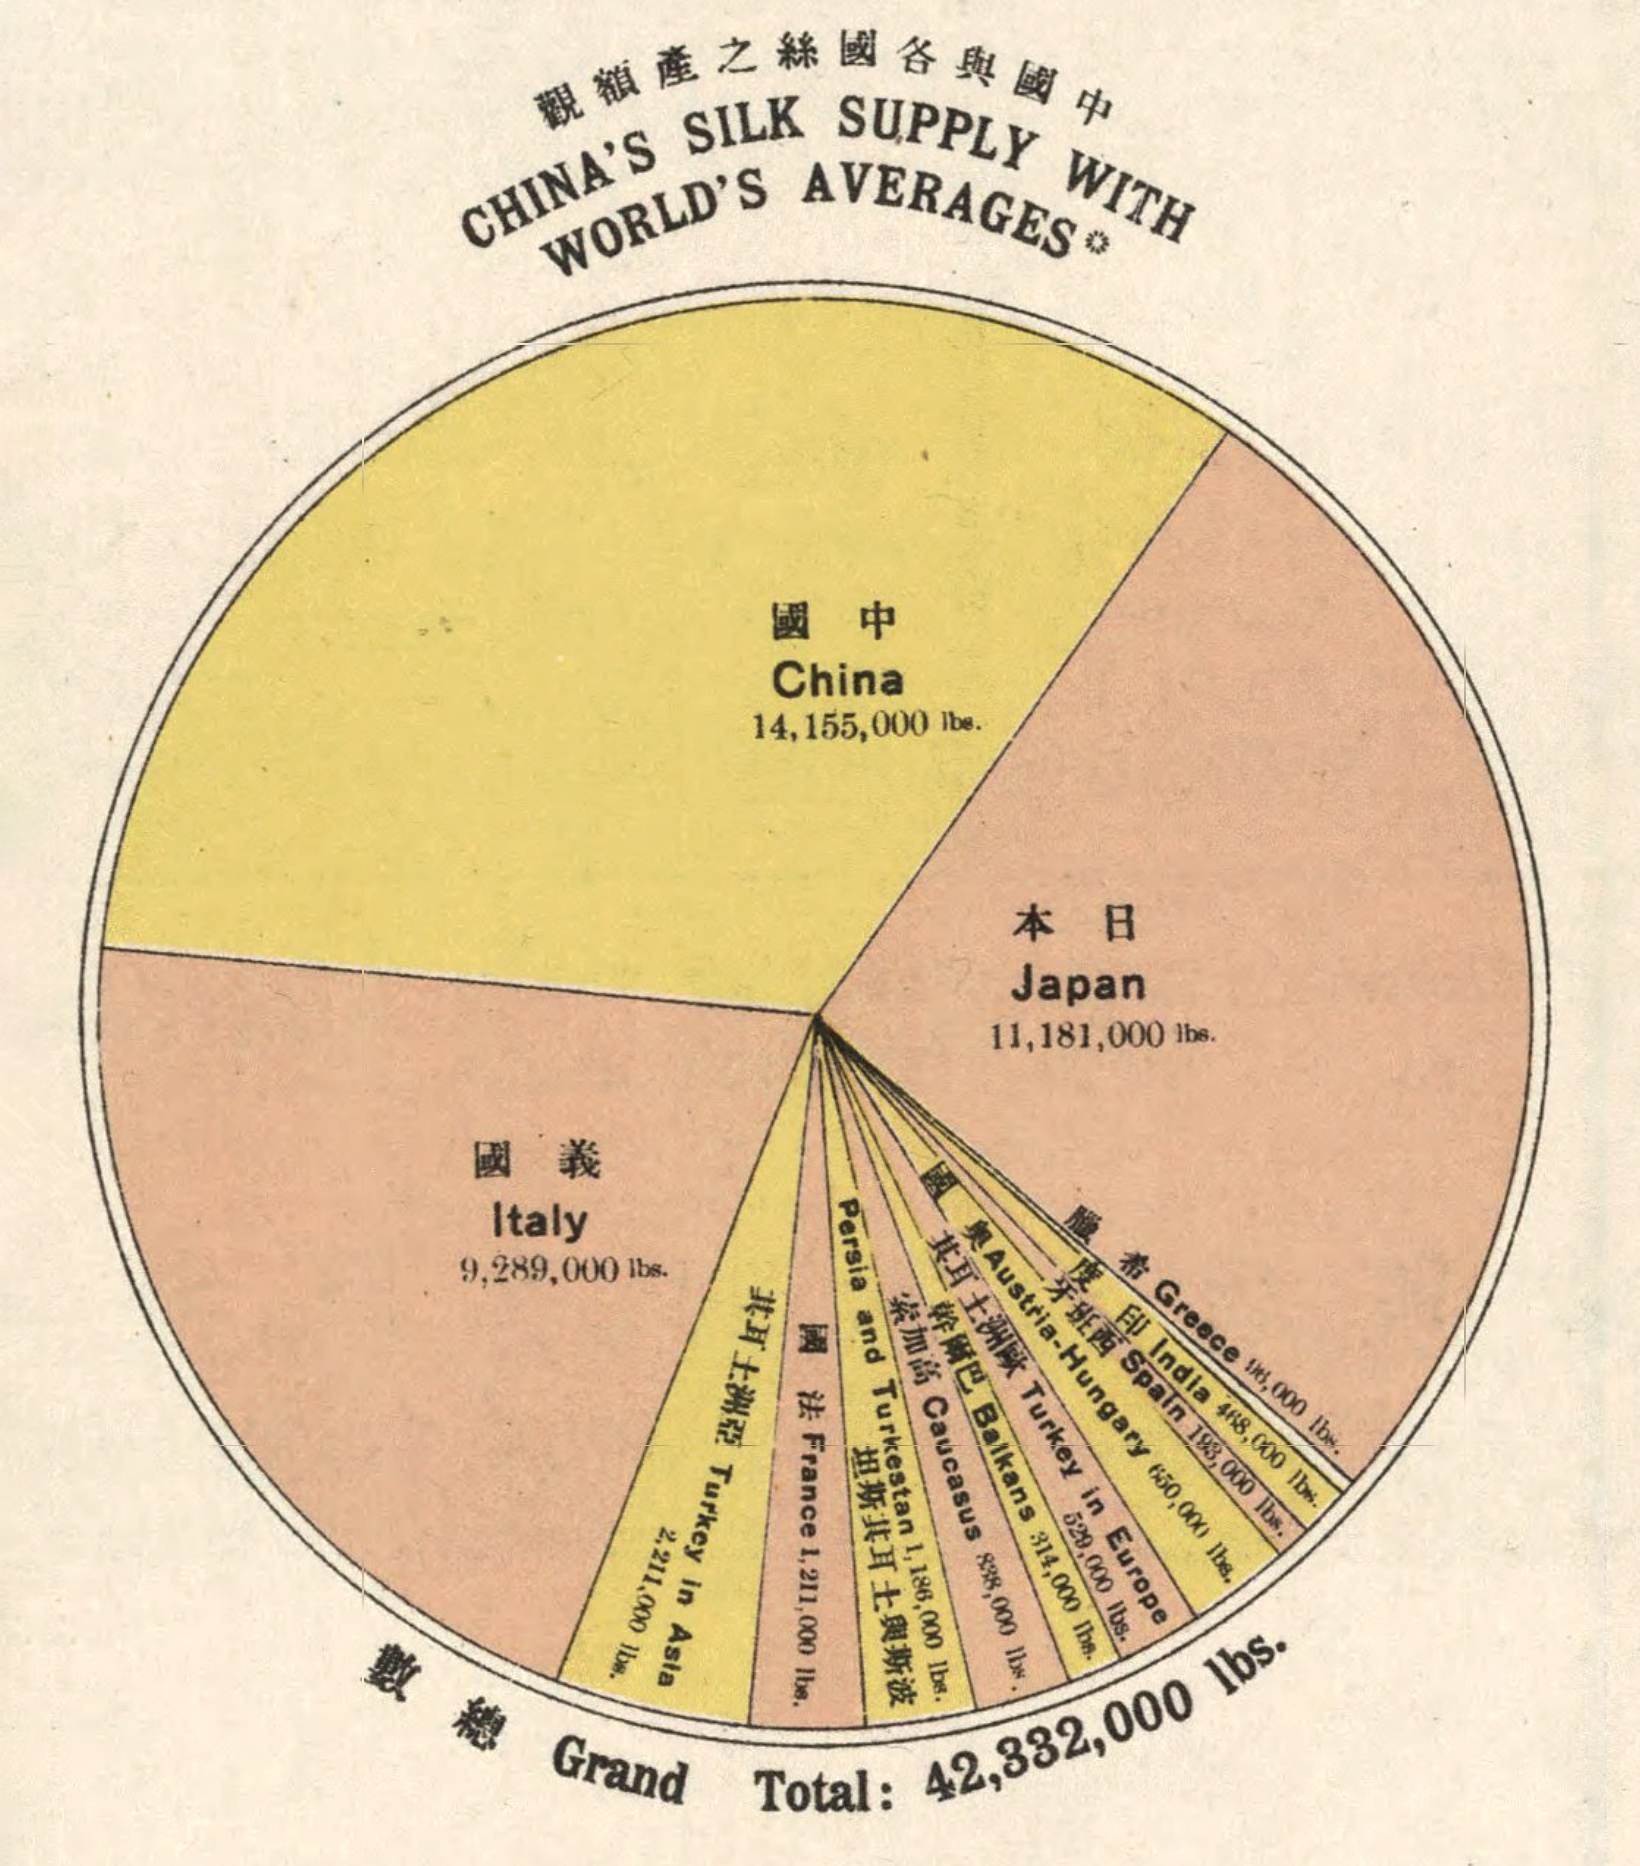 Chart showing China's silk supply in 1914